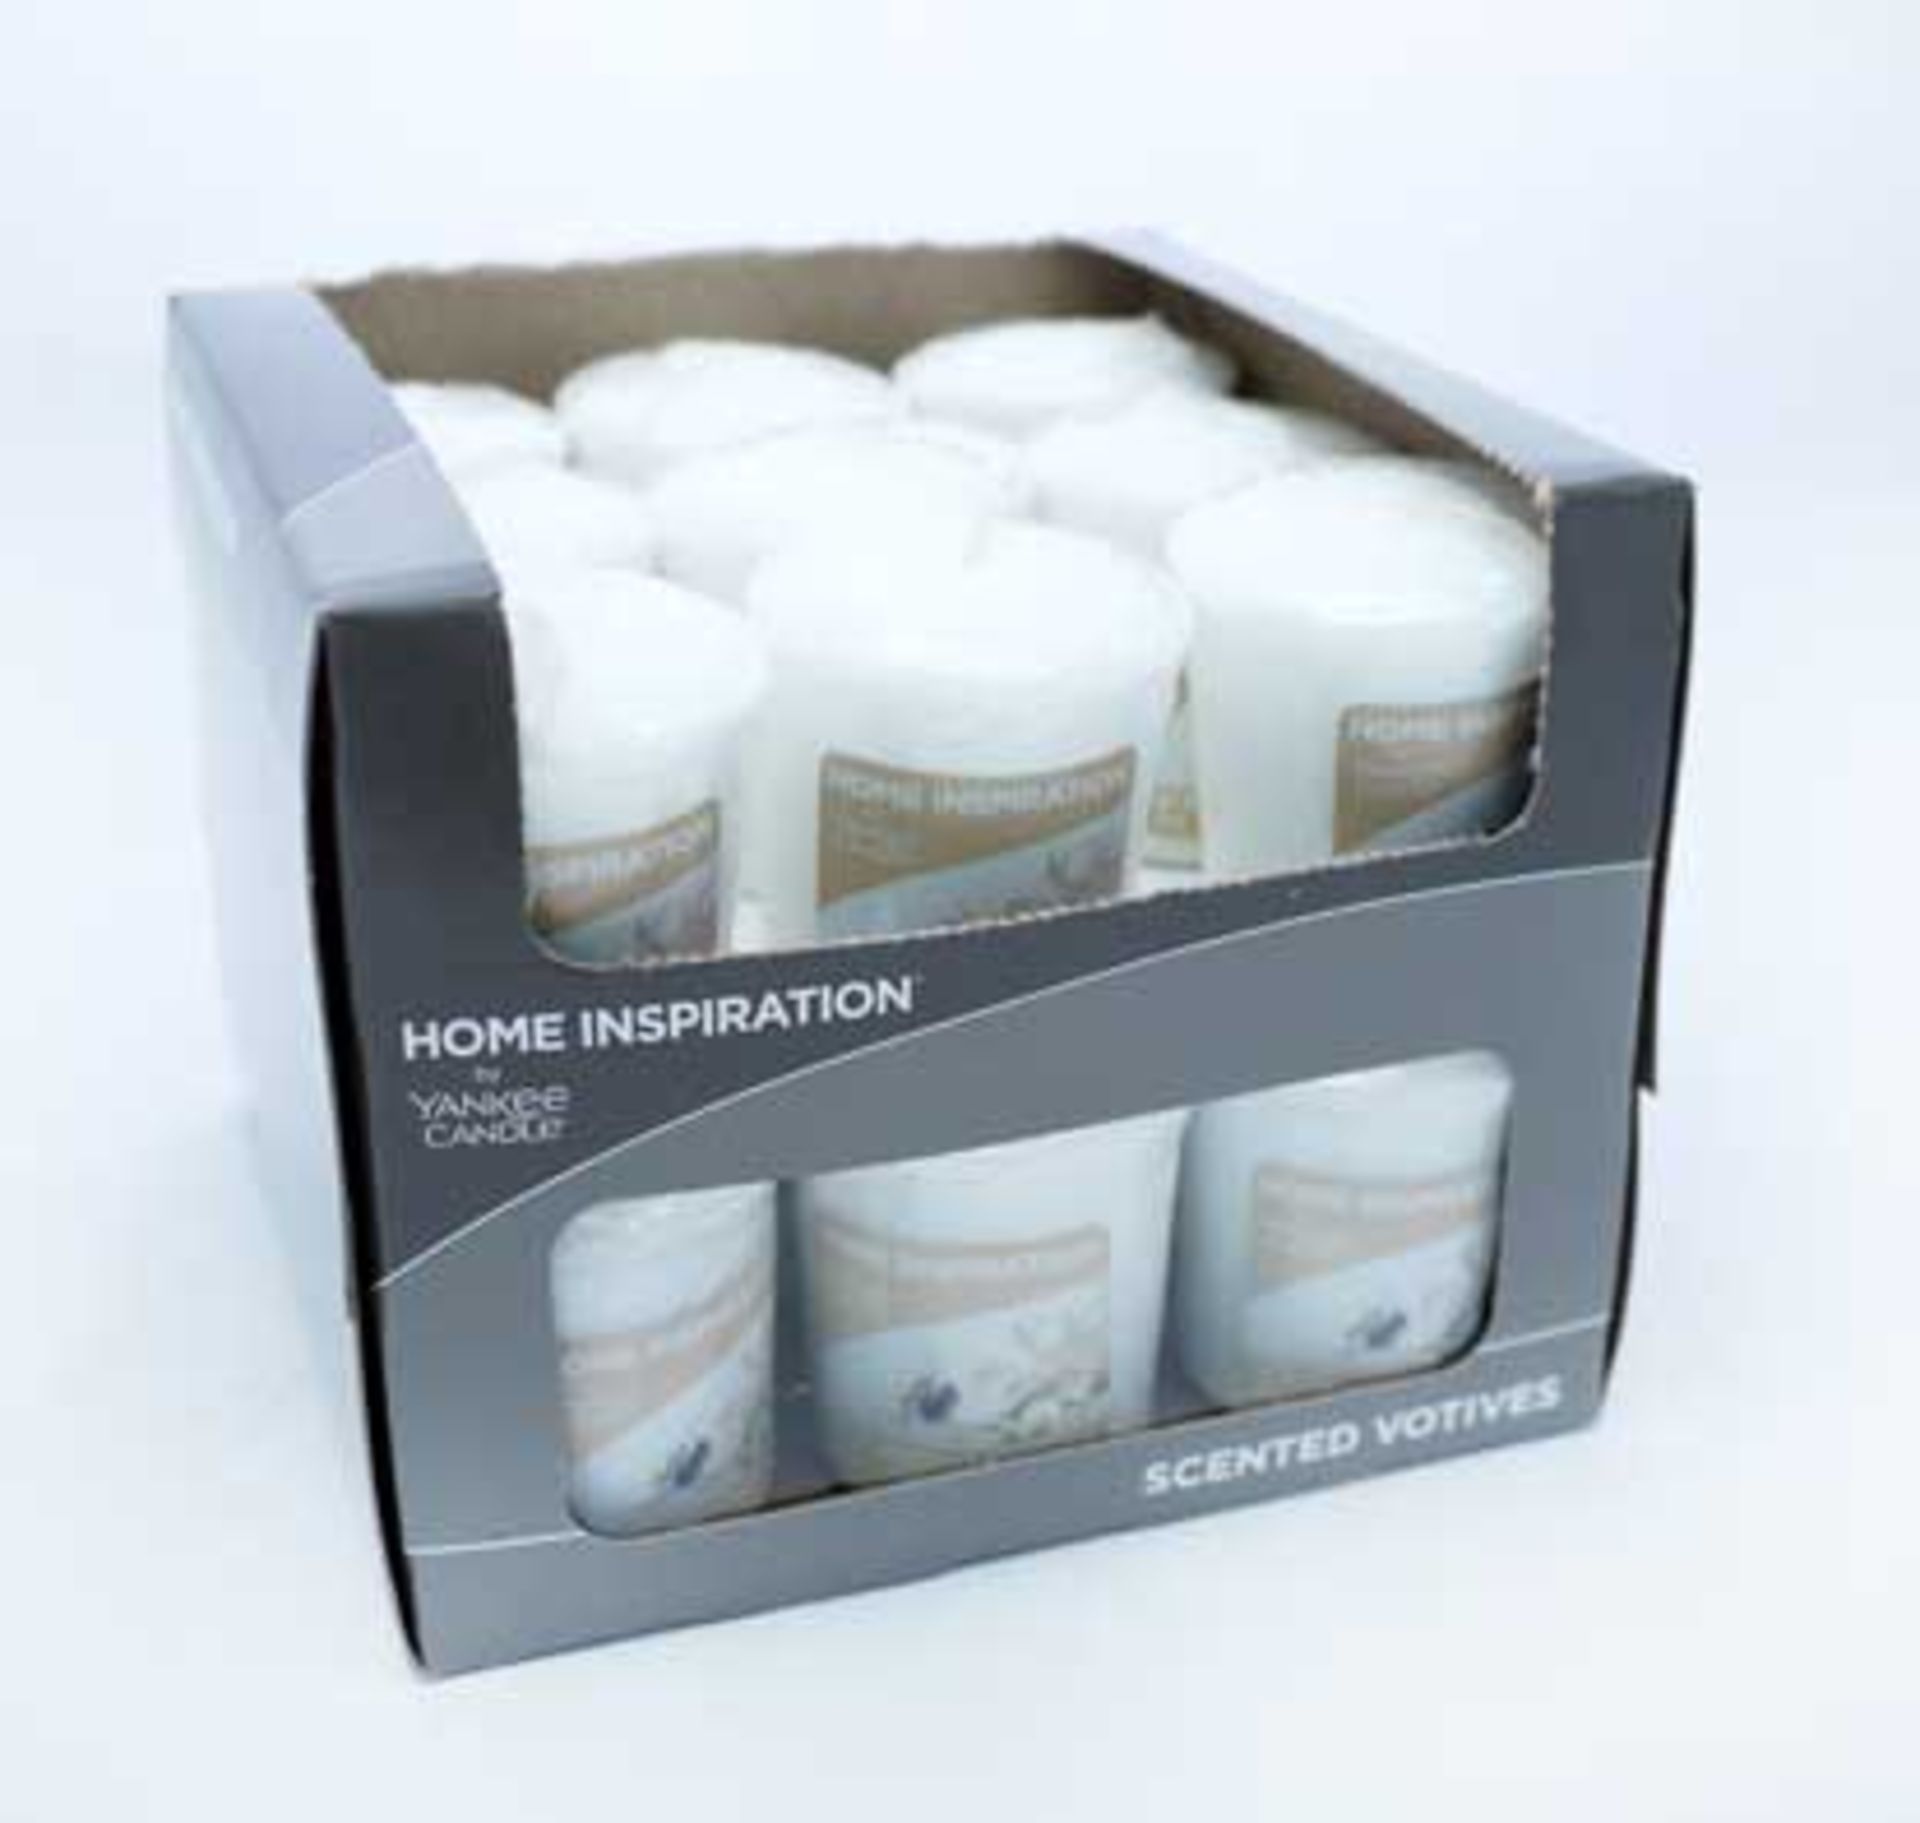 V *TRADE QTY* Brand New 18 X Yankee Candle Votive White Linen & Lace - eBay Price £30.42 X 4 YOUR